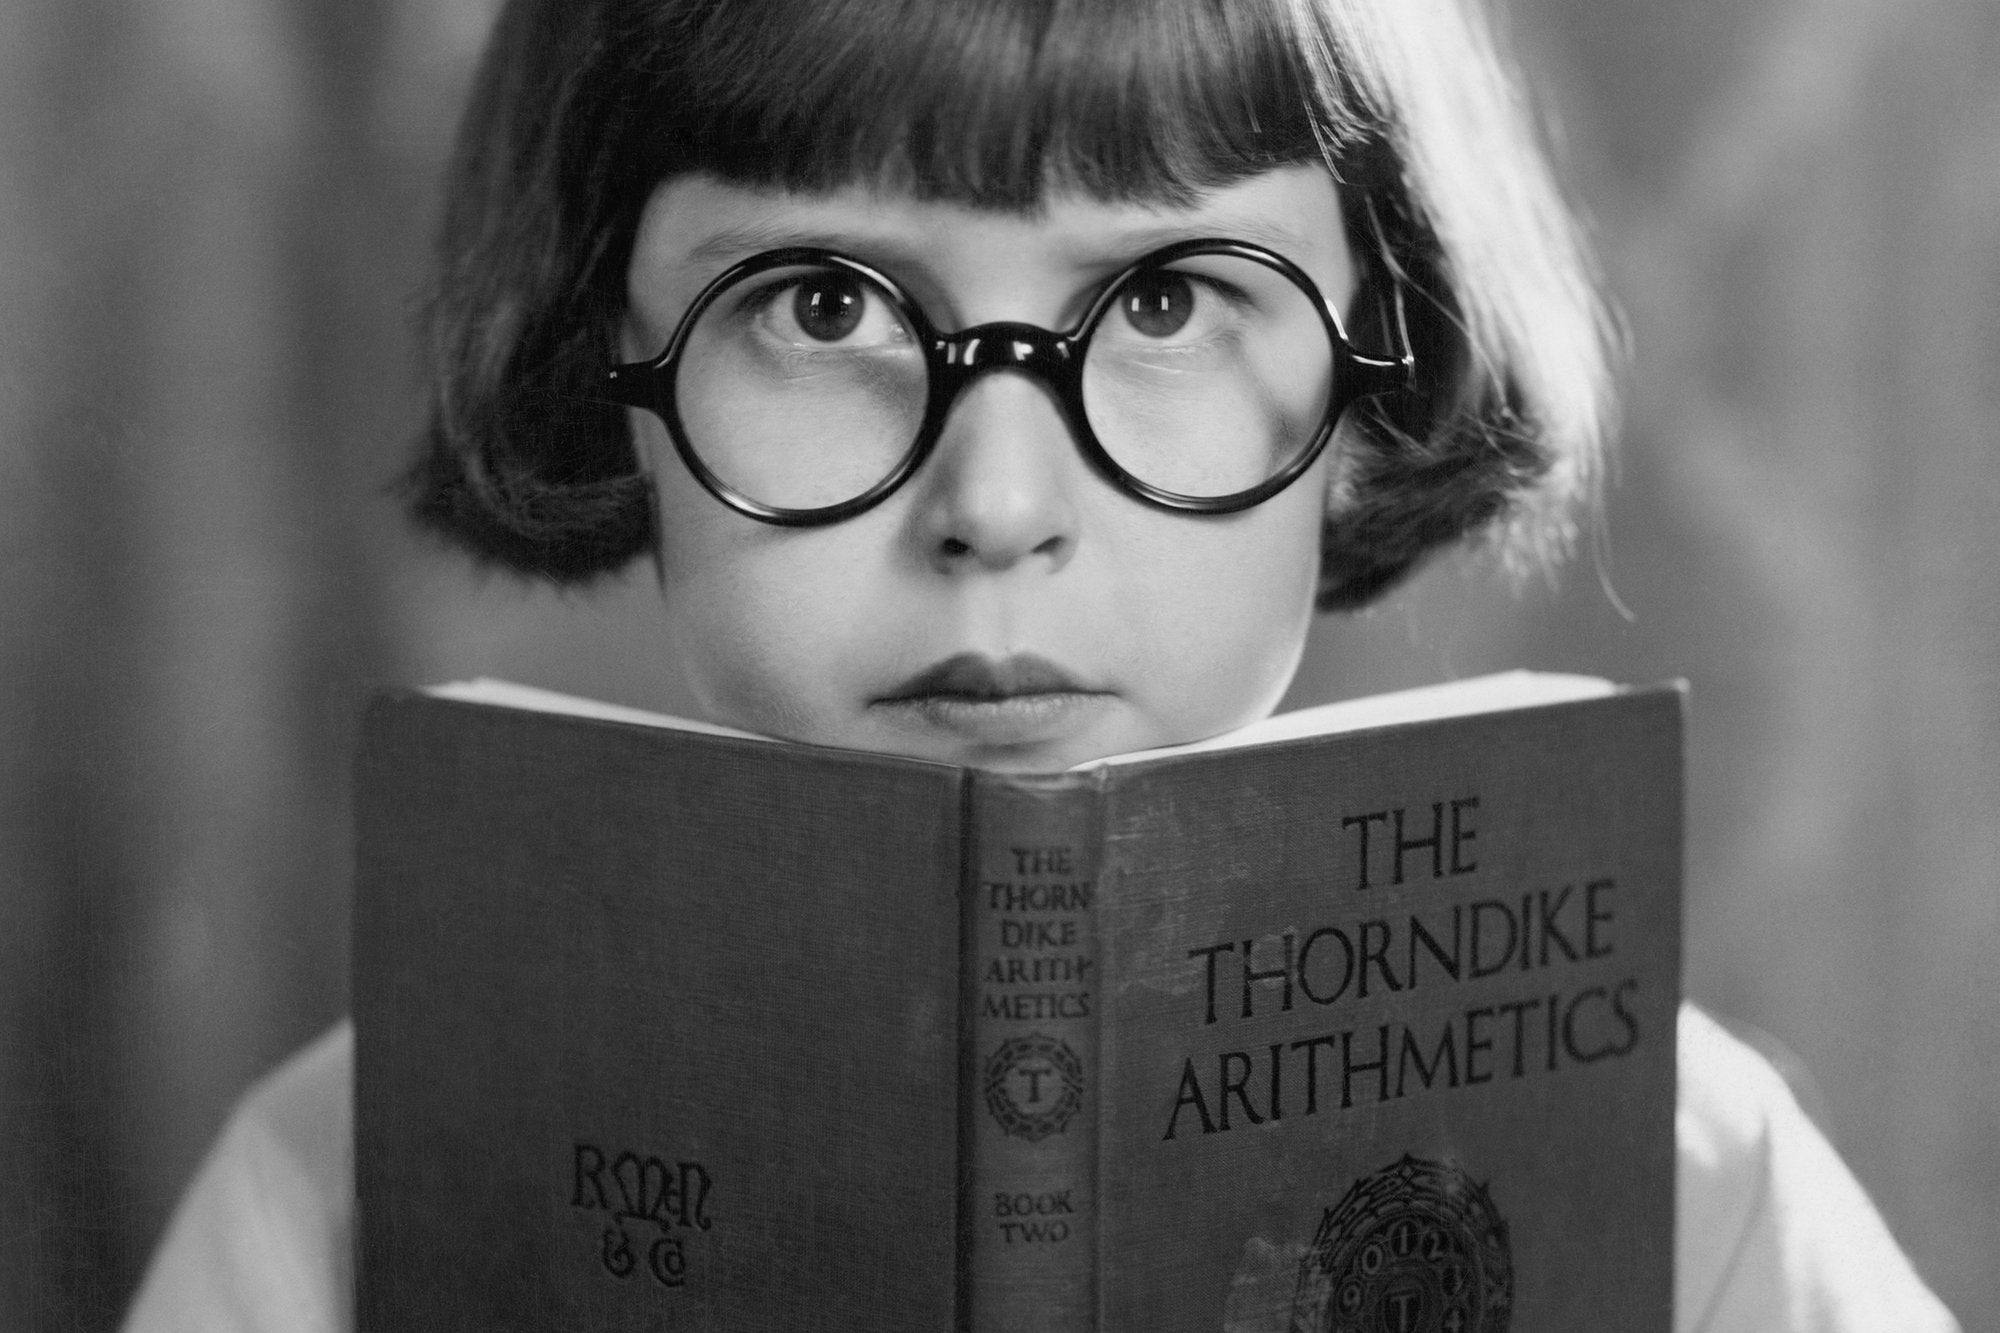 A child wearing oval glasses reads an aritmentic book